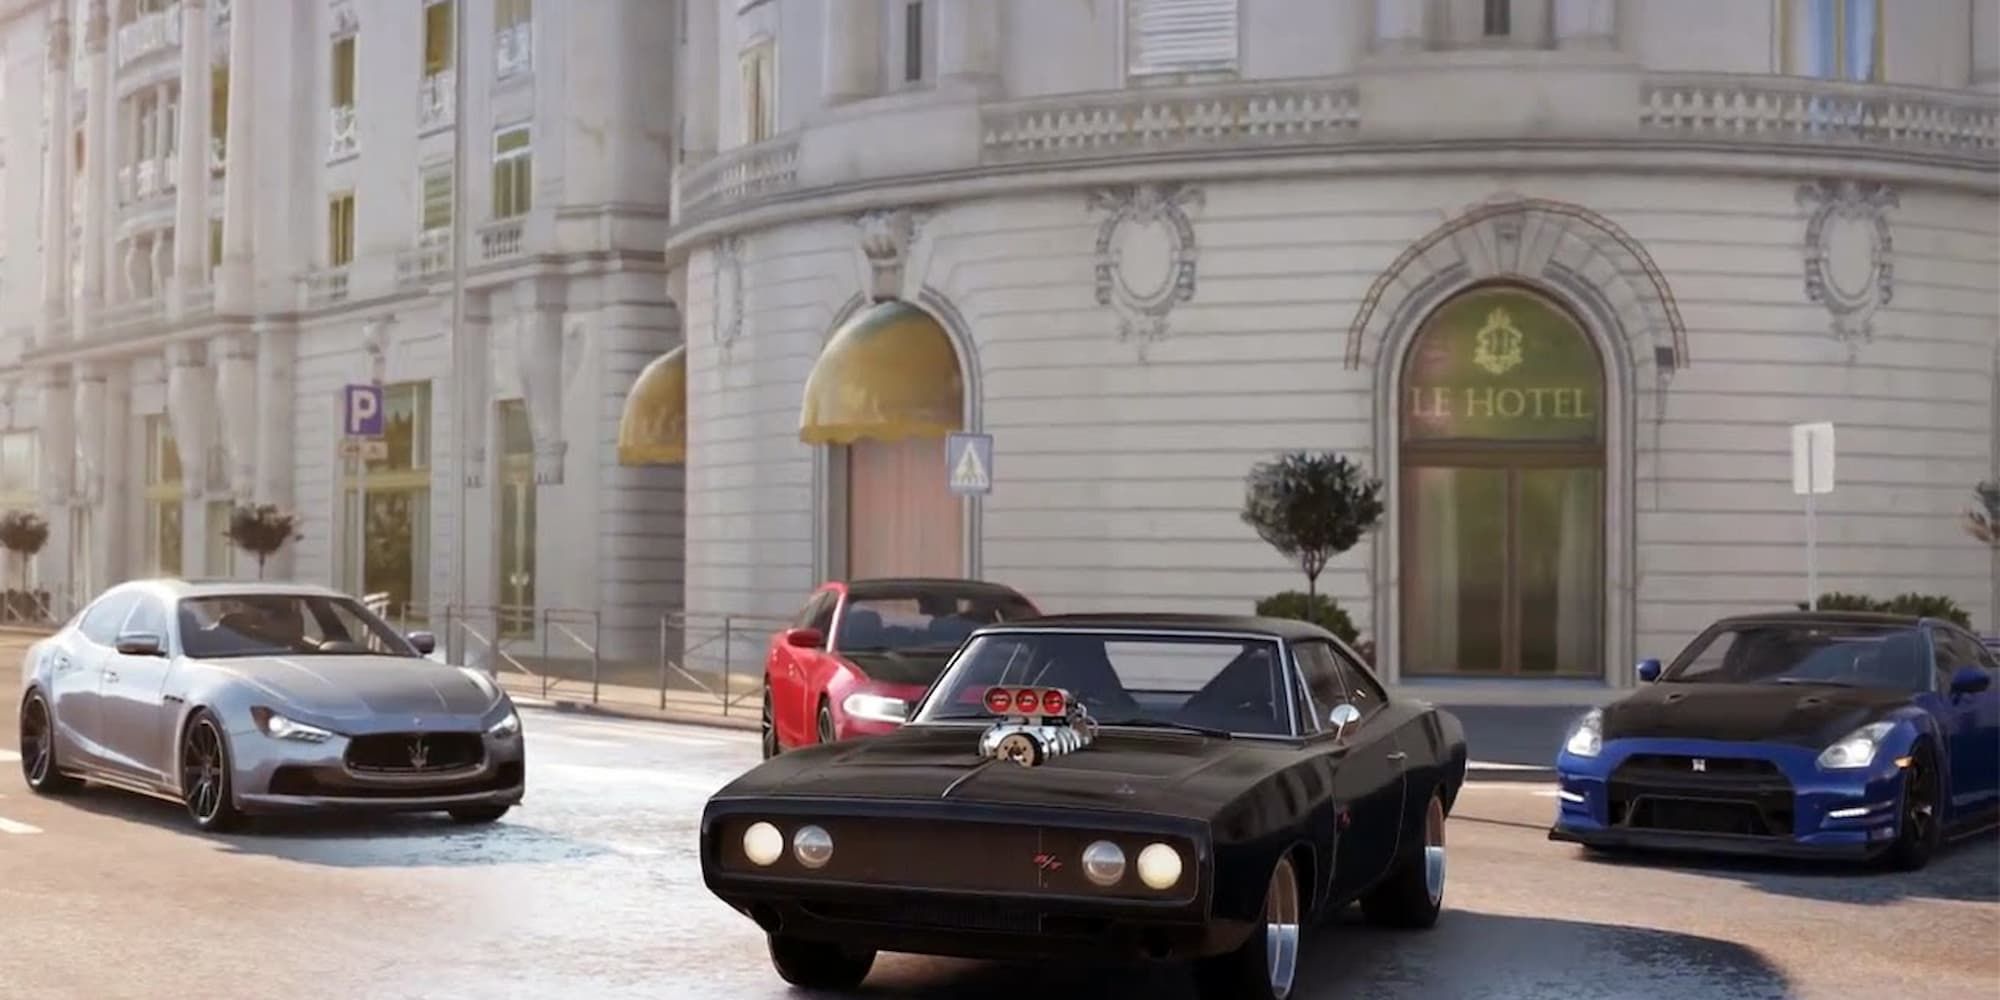 Four cars from the Furious 7 film are parked in front of a hotel in Forza Horizon 2 Presents Fast and Furious.